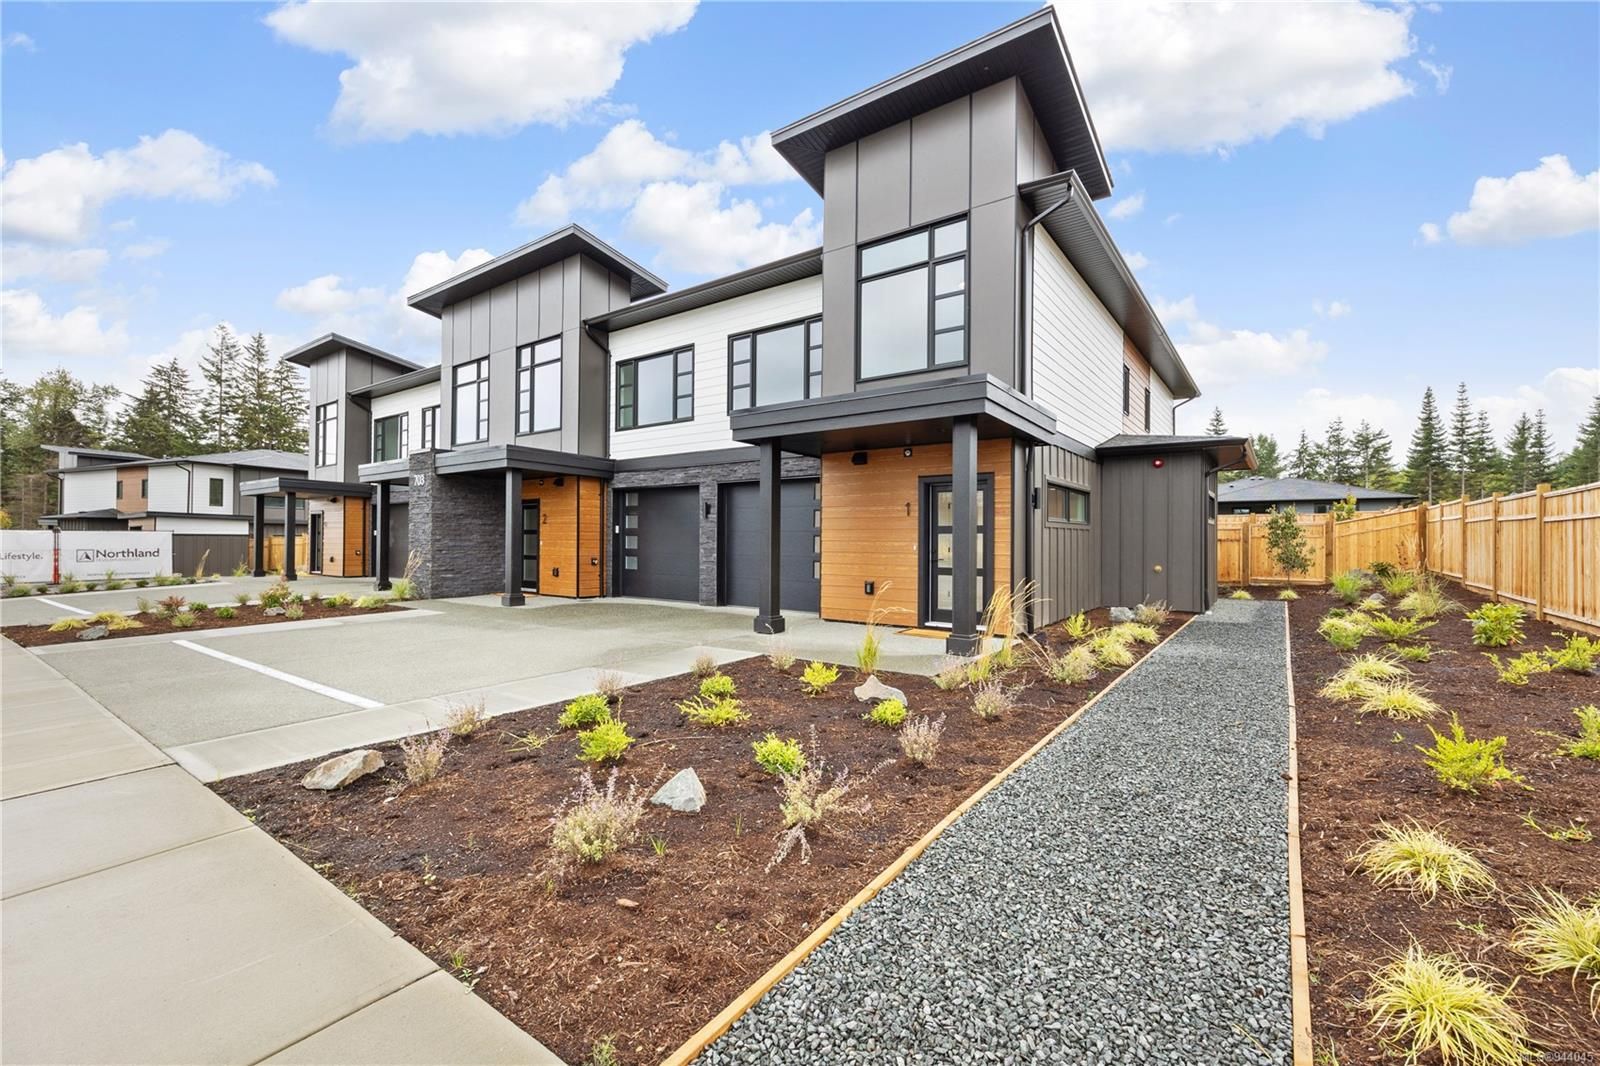 New Townhouse for sale in Campbell River